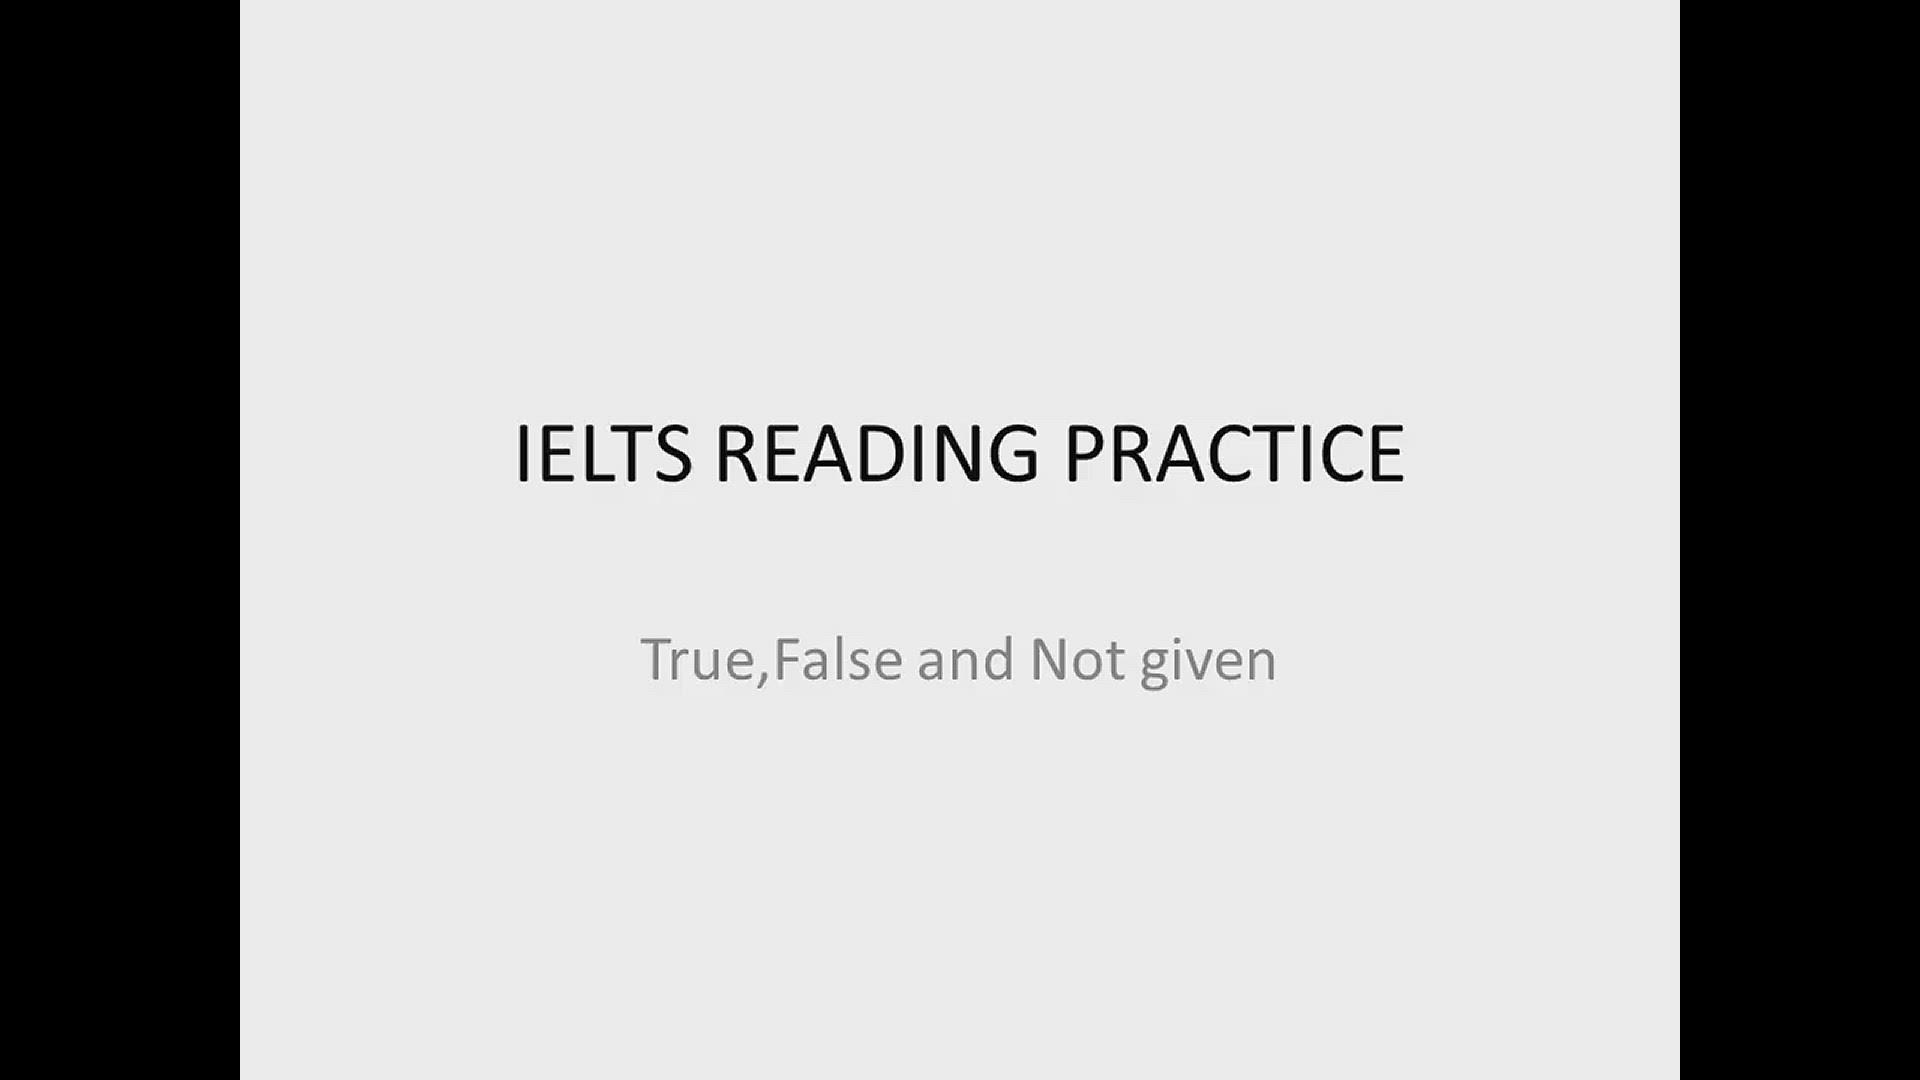 'Video thumbnail for IELTS TRUE, FALSE, NOT GIVEN PRACTICE QUESTION. MUST TRY! QUESTION NUMBER 2'